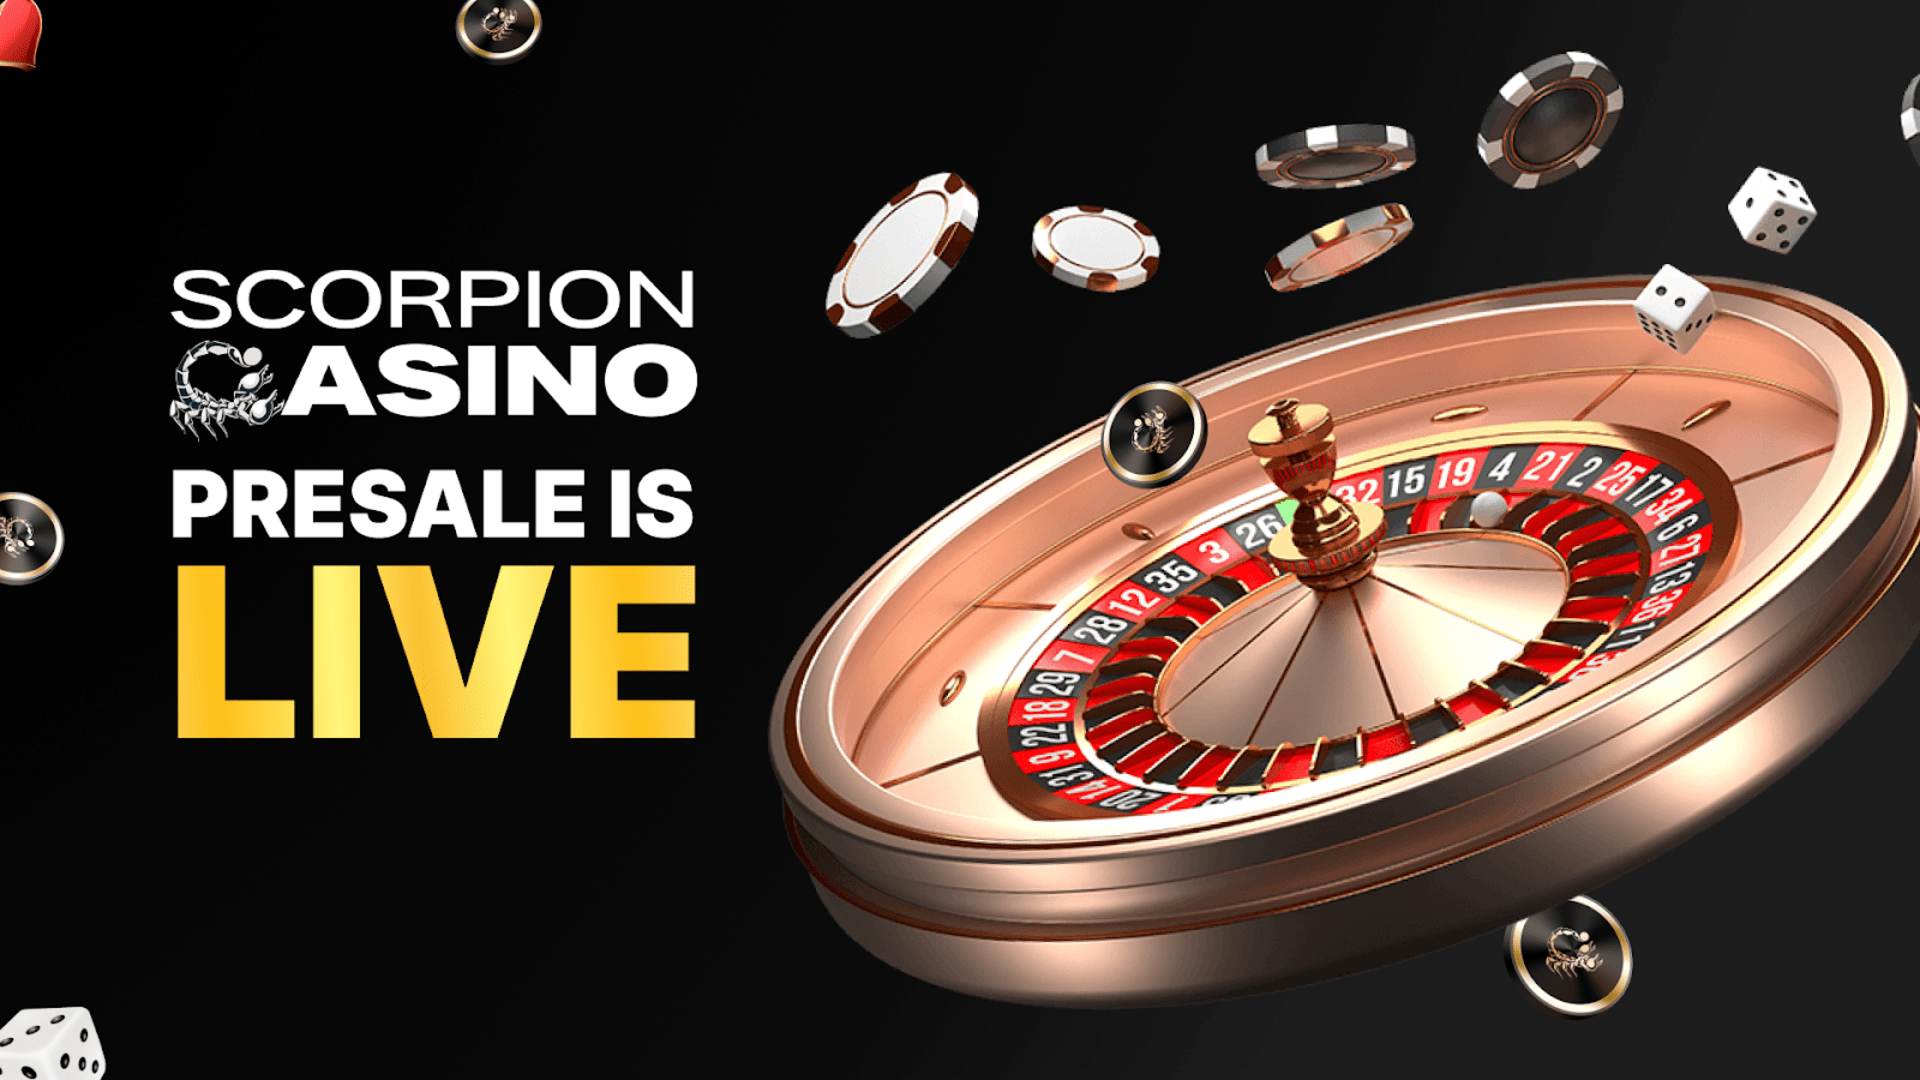 Scorpion Casino, Shiba Memu, or Chimpzee, Which Coin May Deliver Tenfold Returns?